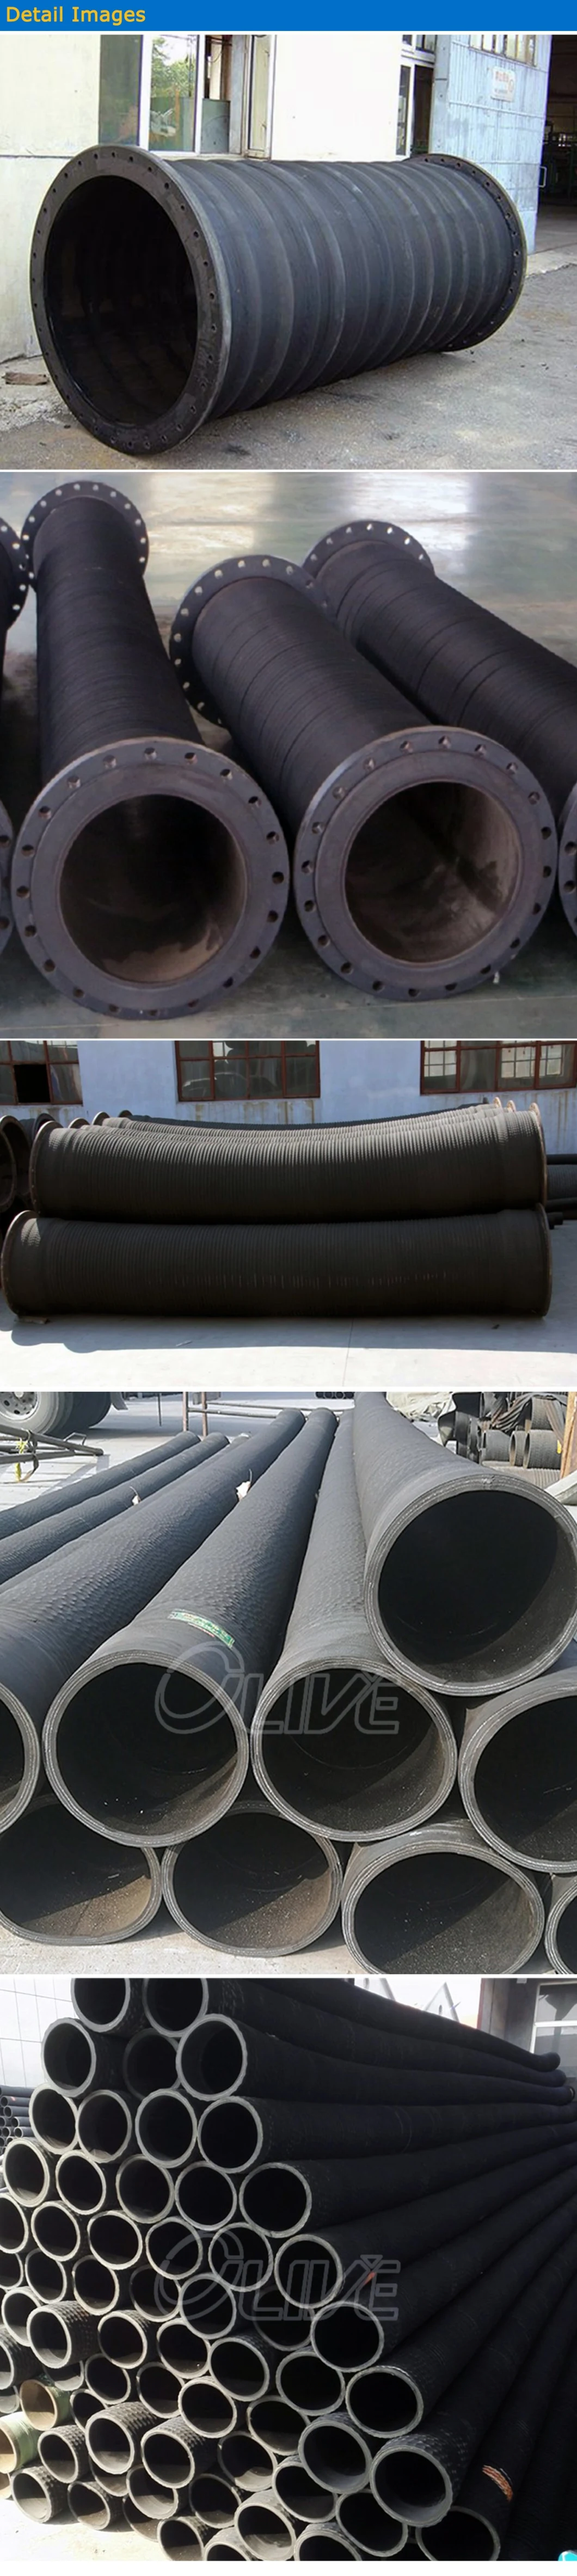 Bulk Materials Dry Cement Coal Powder Suction and Delivery Hose